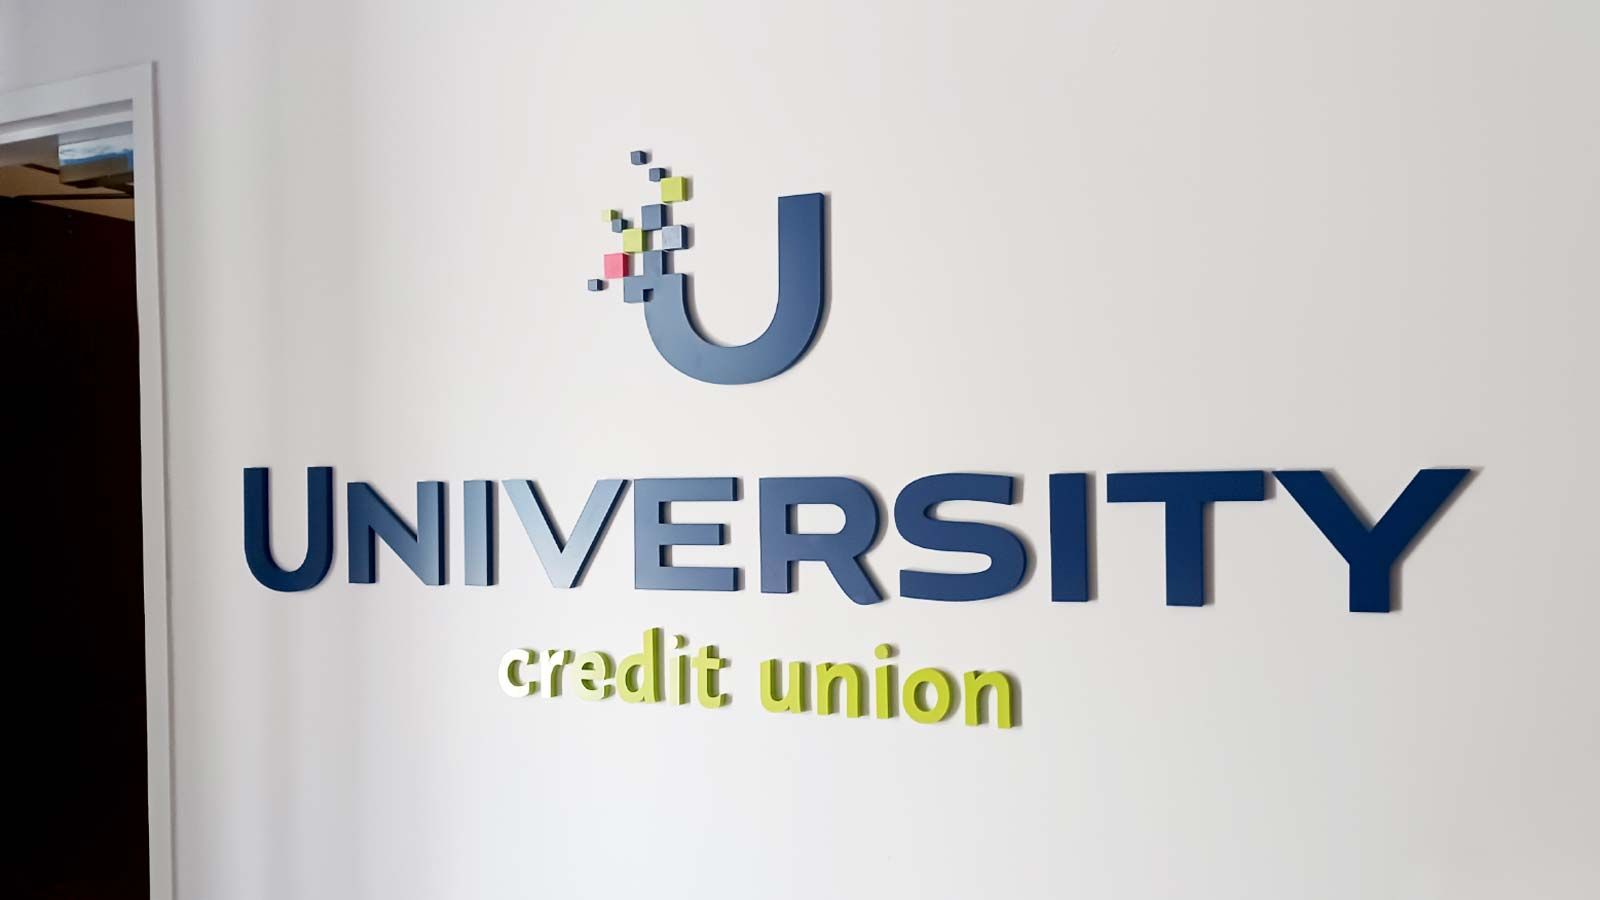 University Credit Union interior sign placed on the wall